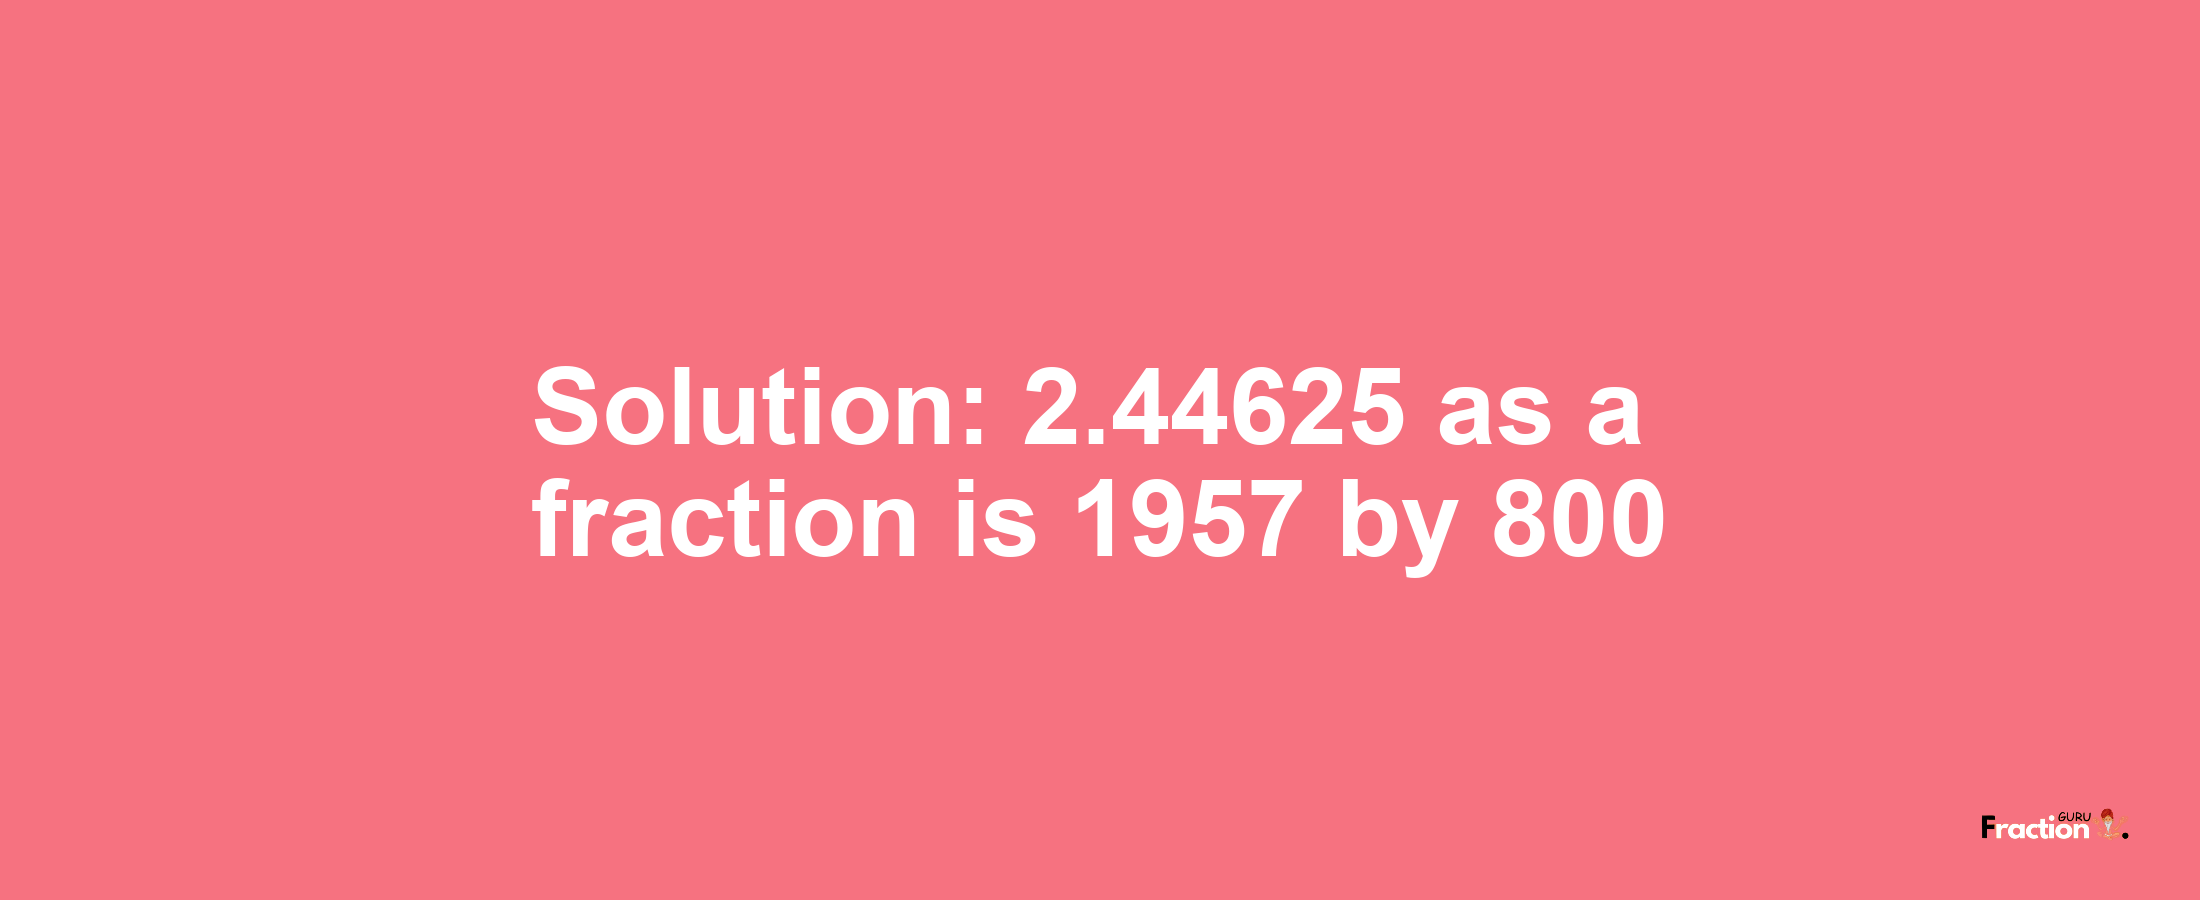 Solution:2.44625 as a fraction is 1957/800